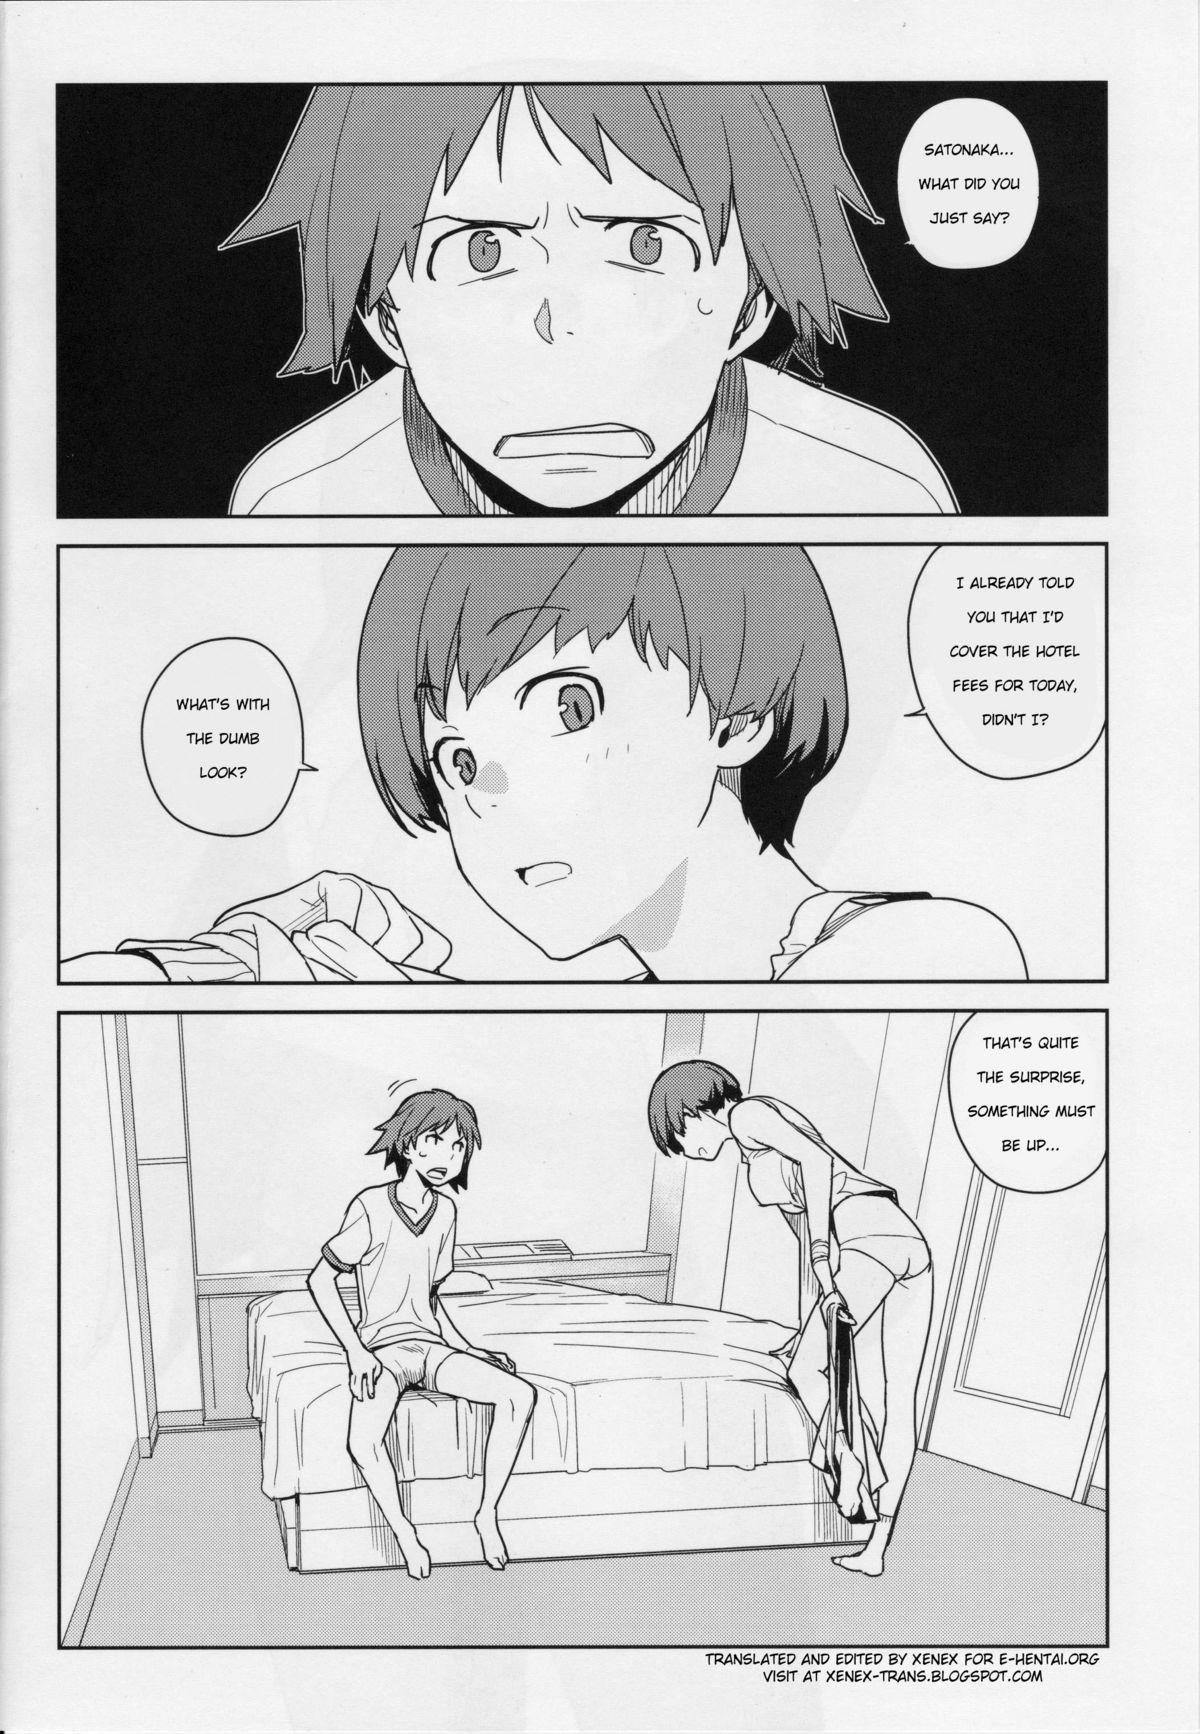 Tiny Chie Tomoe - Persona 4 Livecams - Page 4